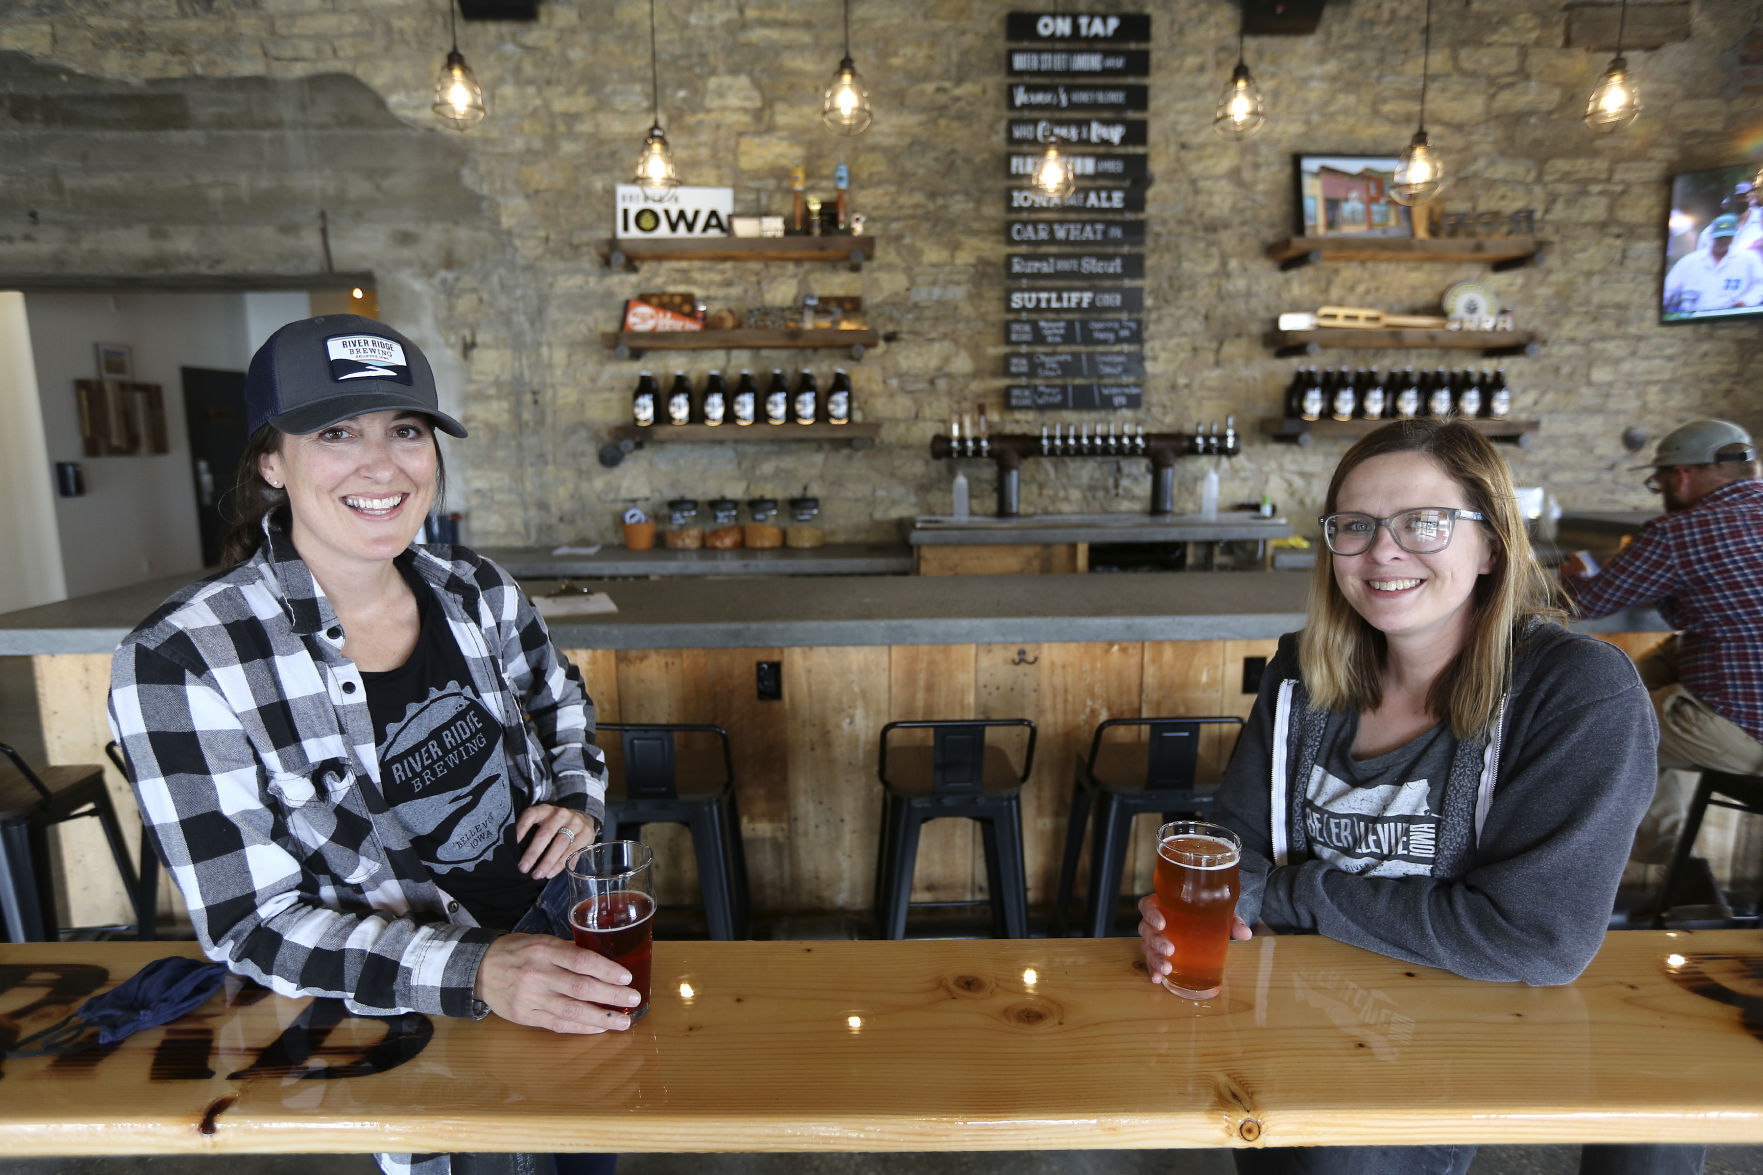 River Ridge Brewing opened its new location along the Mississippi River in Bellevue, Iowa, on Friday, April 9, 2021. Pictured are two of the co-owners, Kelly Hueneke (left) and Allison Simpson. PHOTO CREDIT: Dave Kettering